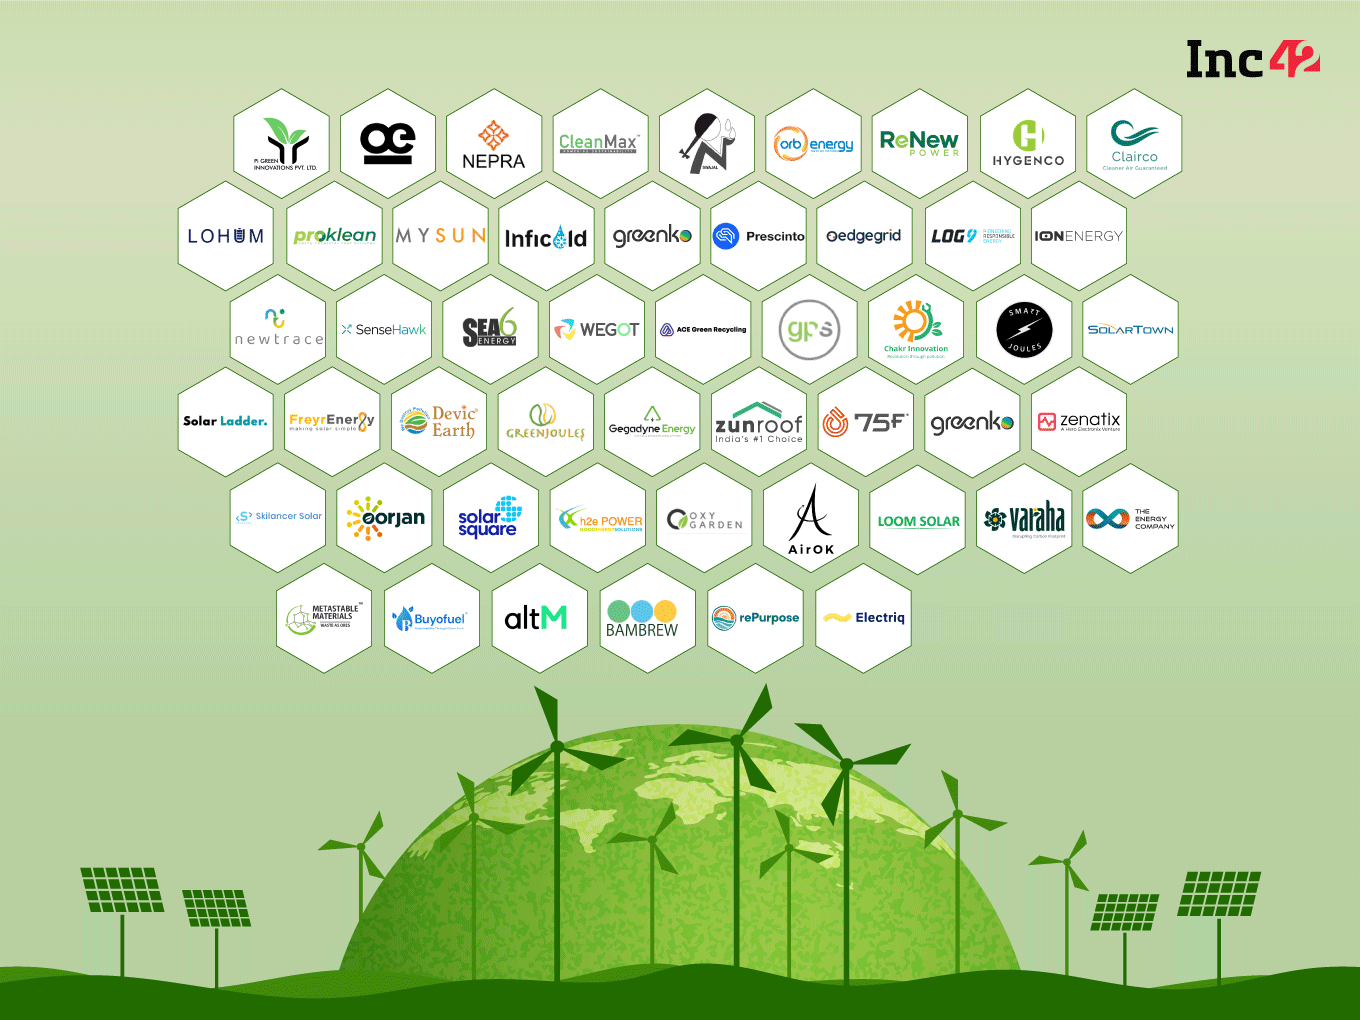 Inc42 has compiled a list of 51 cleantech startups, which have come up with unique solutions to contribute to India’s clean energy goal.